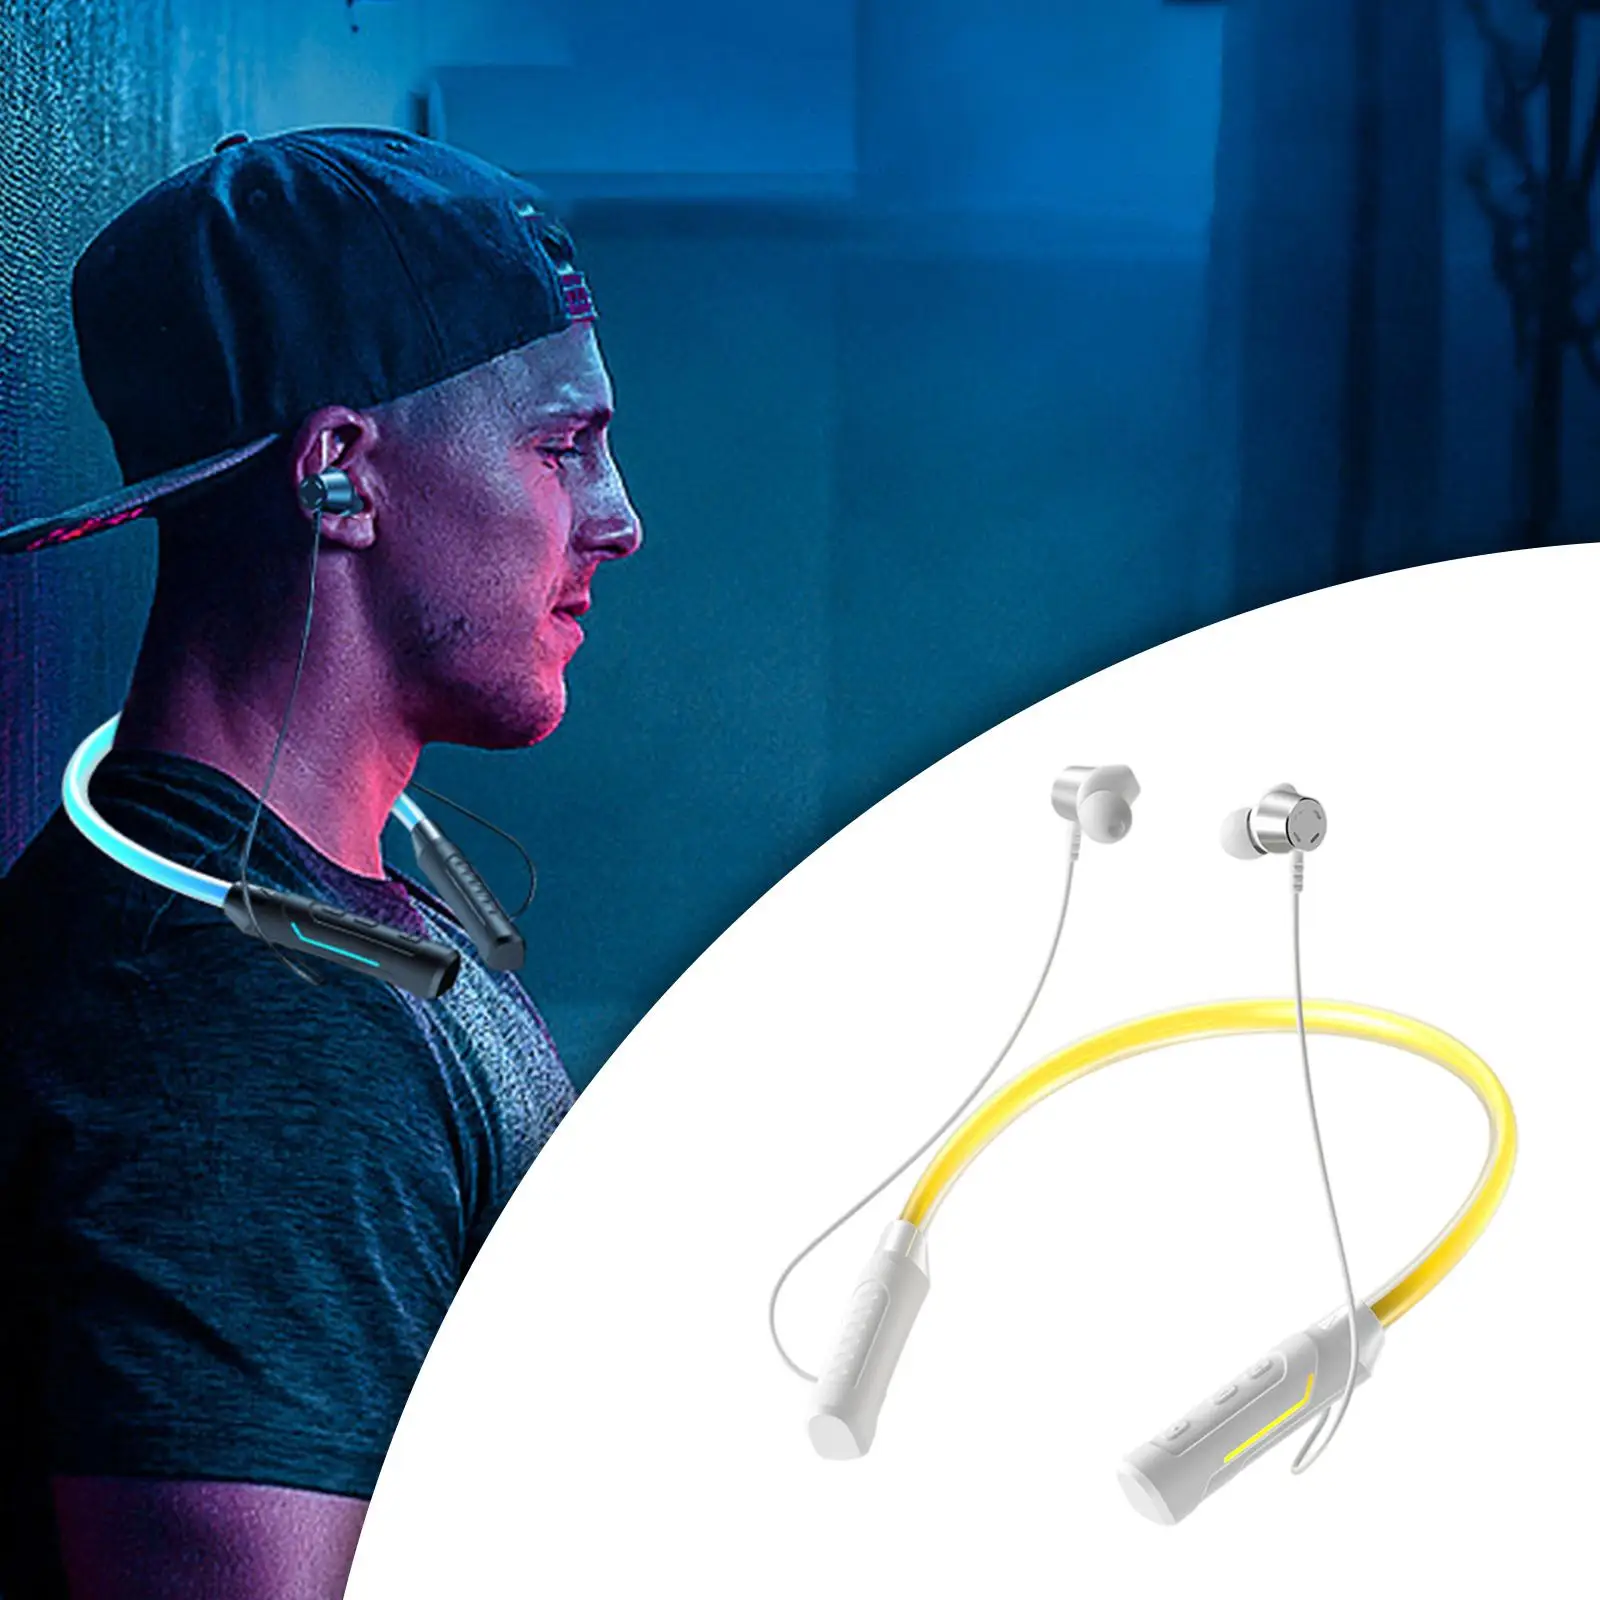  Headphones, Neckband Stereo Earphones RGB 00mAh Sports Headset Sports Earphone for Running Home Jogging Bicycling Driving